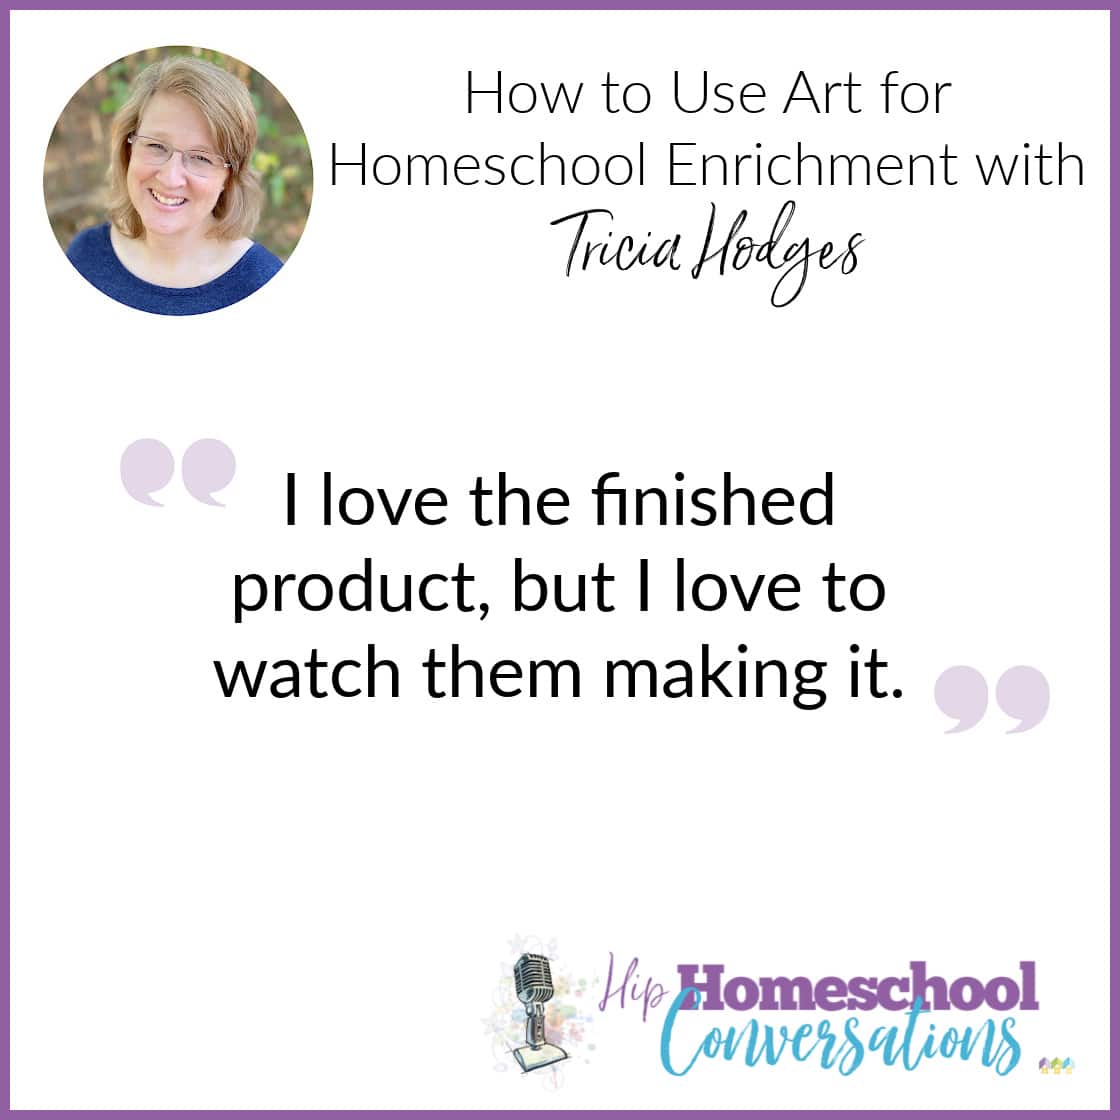 Join us as Tricia discusses how finding subjects that all of your students can do together can be challenging, but art is one way to bring everyone together to create homeschooling memories that you will cherish.